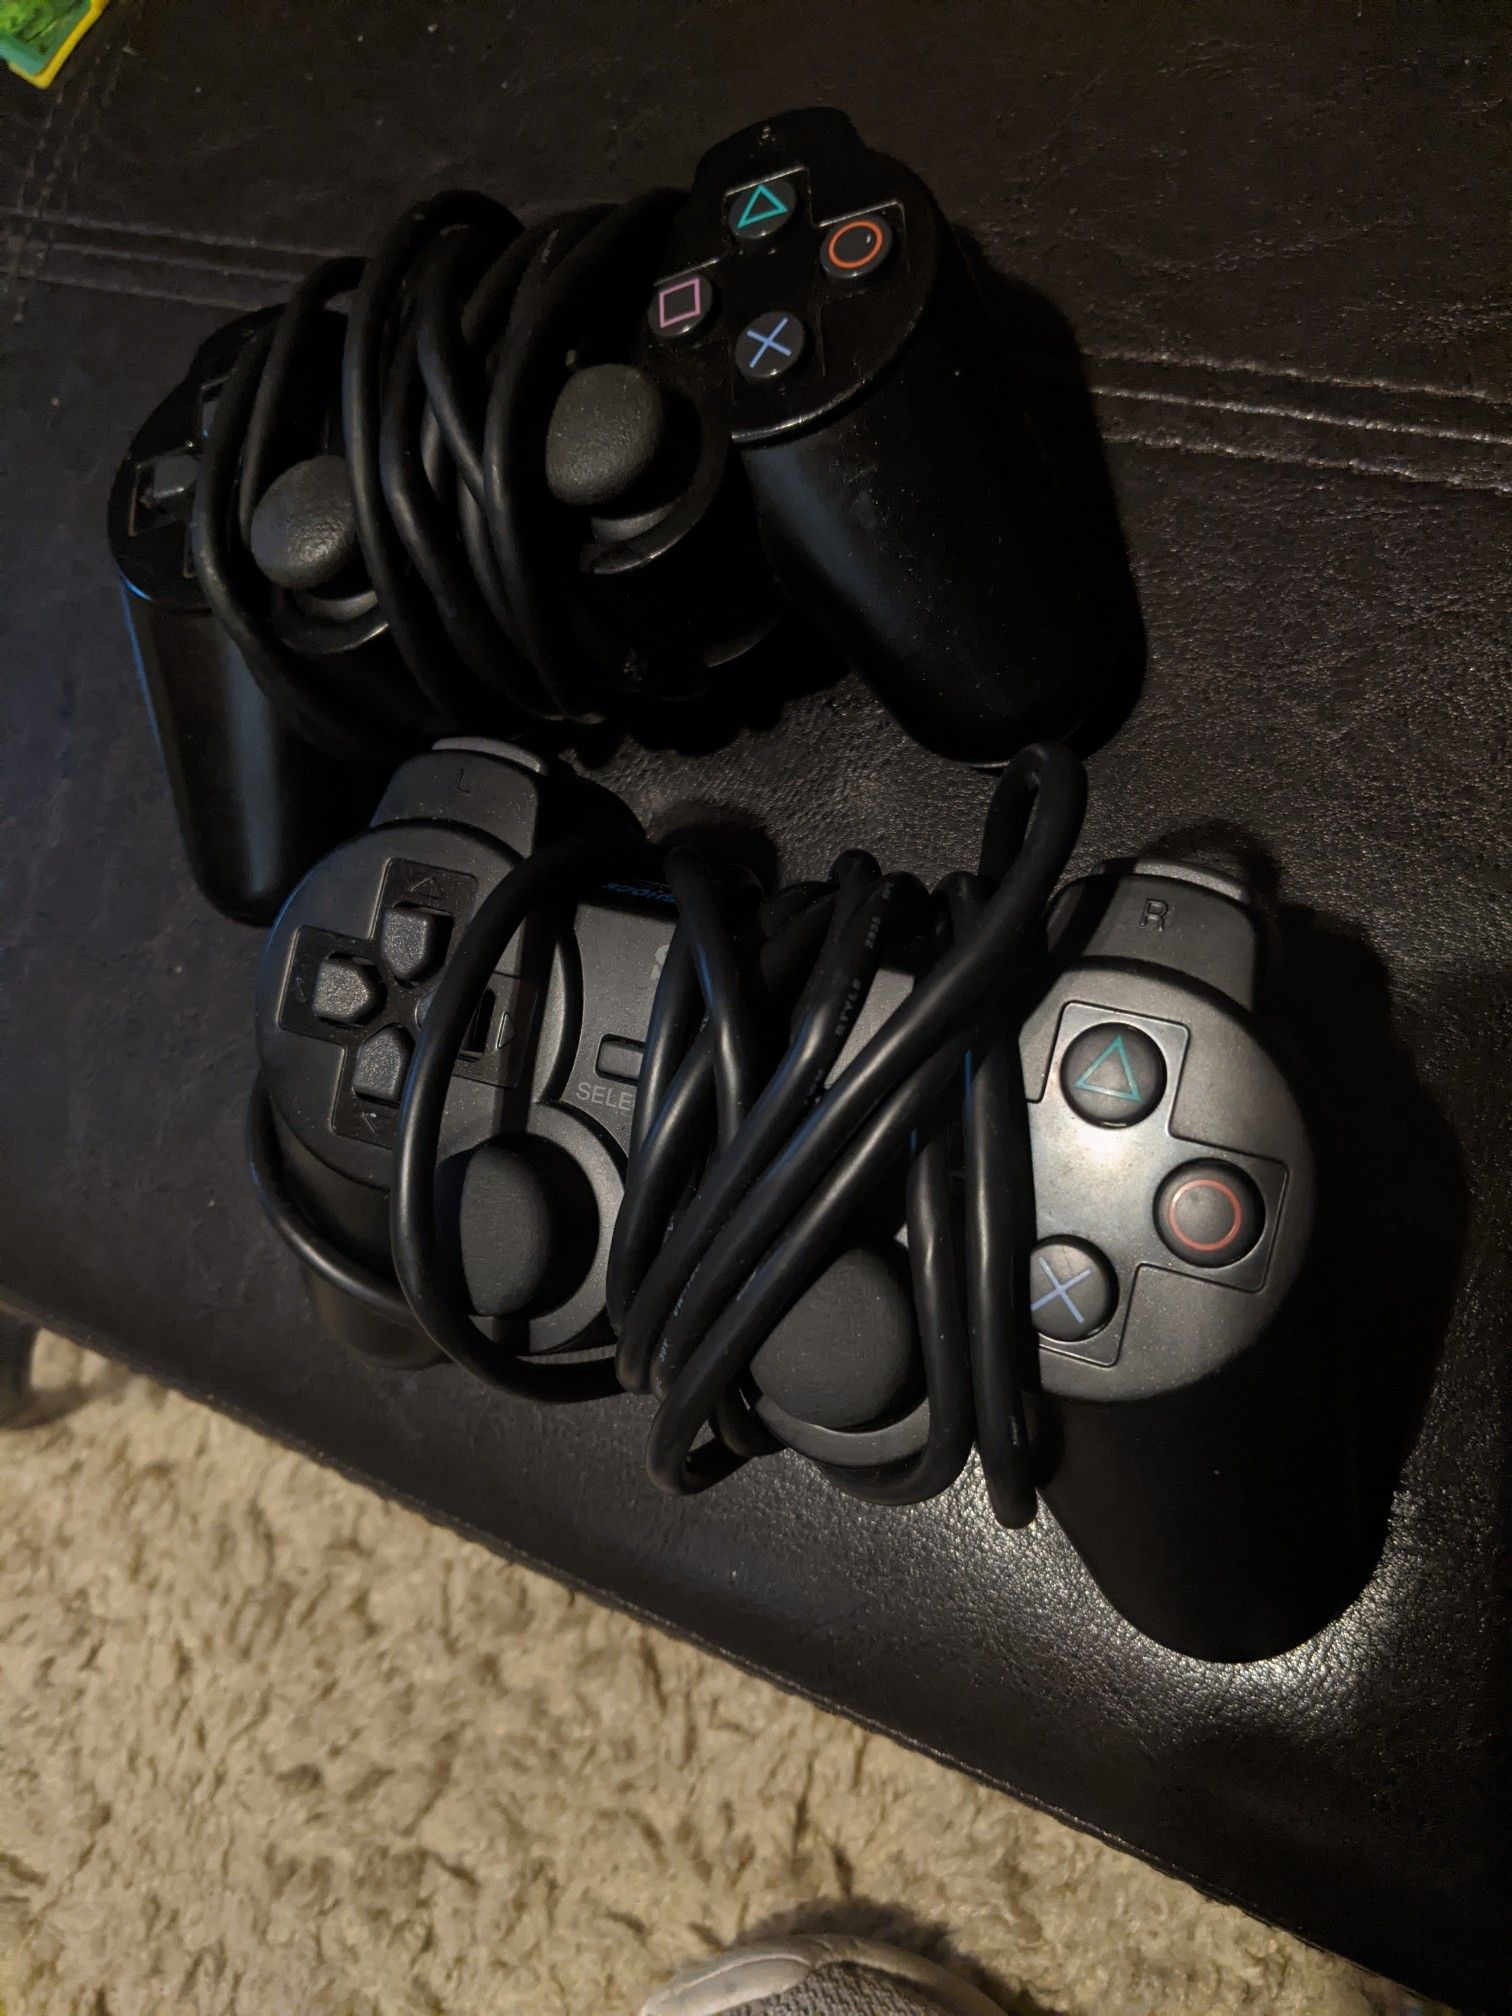 Two Ps2 controllers